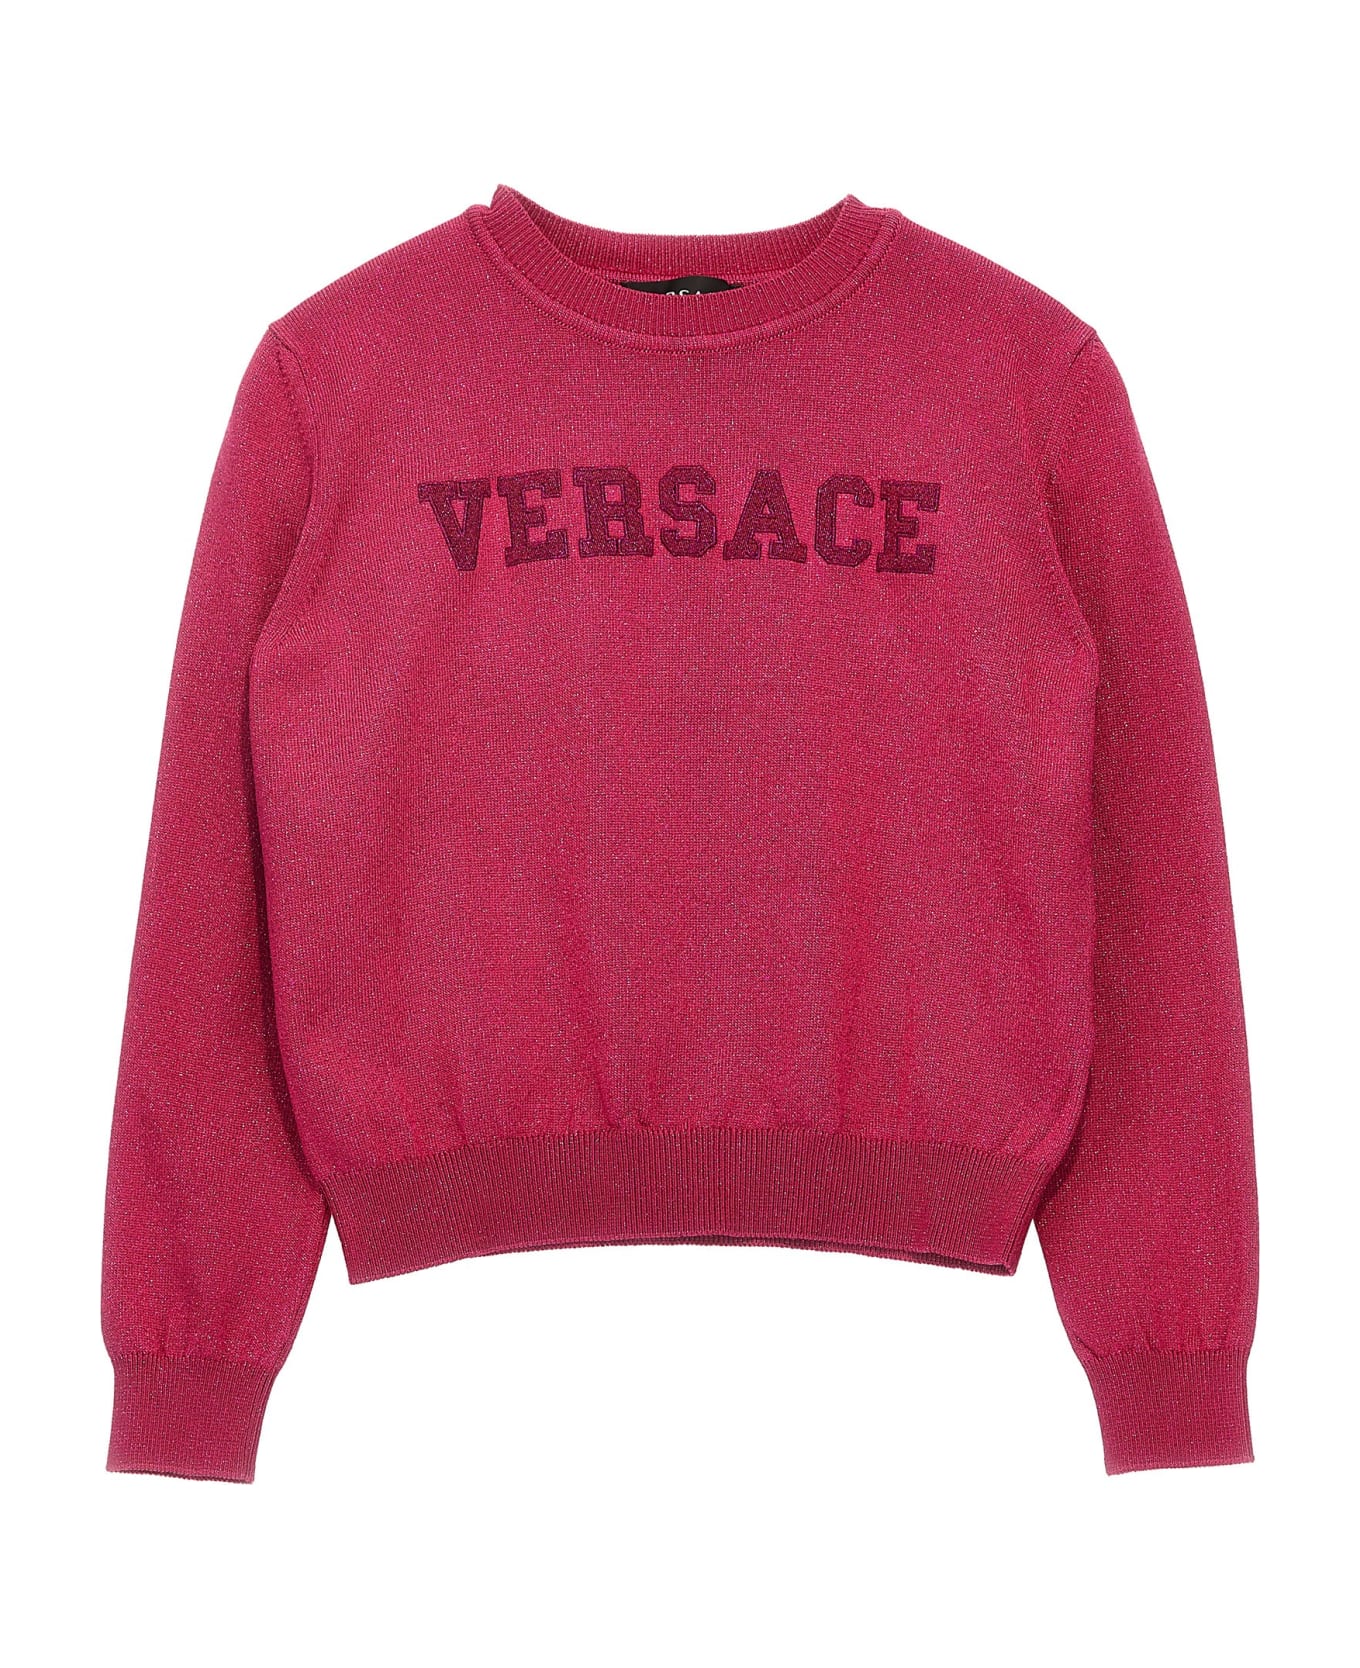 Young Versace Logo Embroidery Sweater - Fuxia Lurex